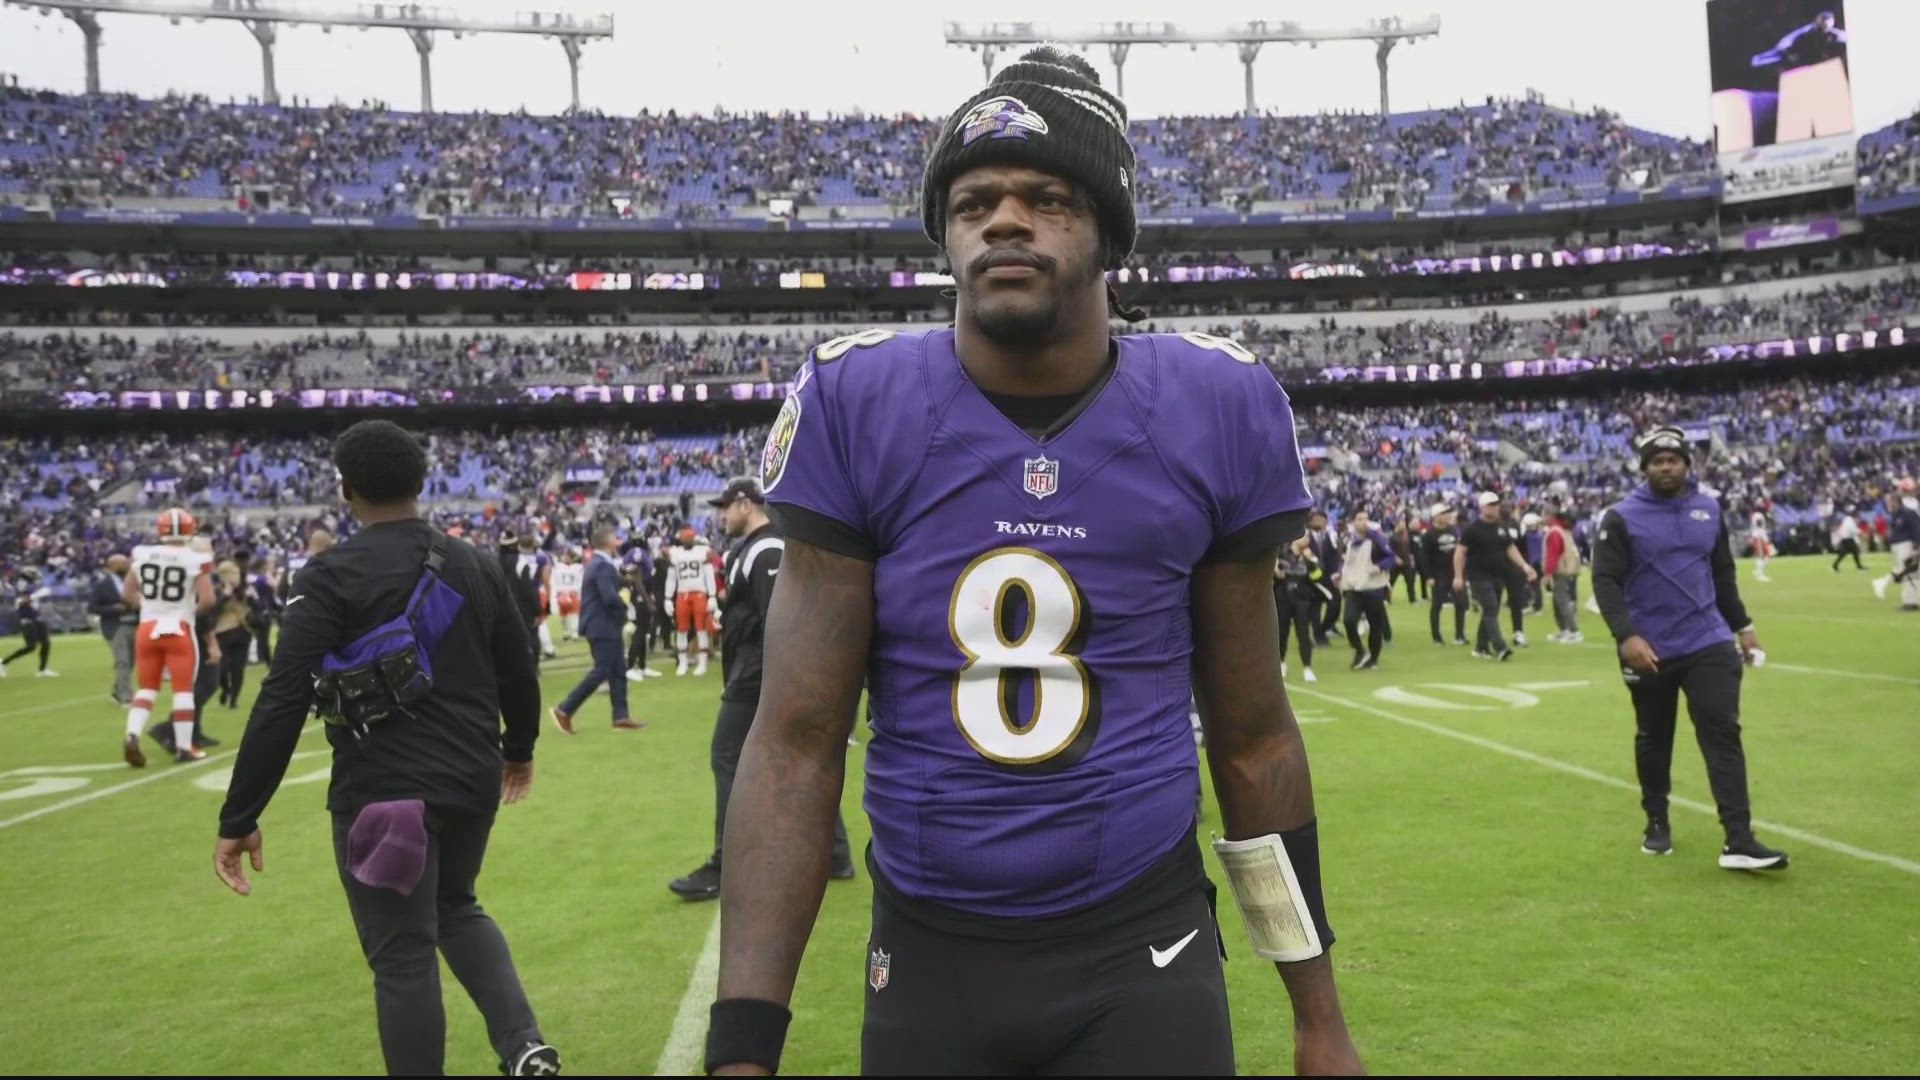 Lamar Jackson said Monday he has requested a trade from the Baltimore Ravens, saying the team “has not been interested in meeting my value."